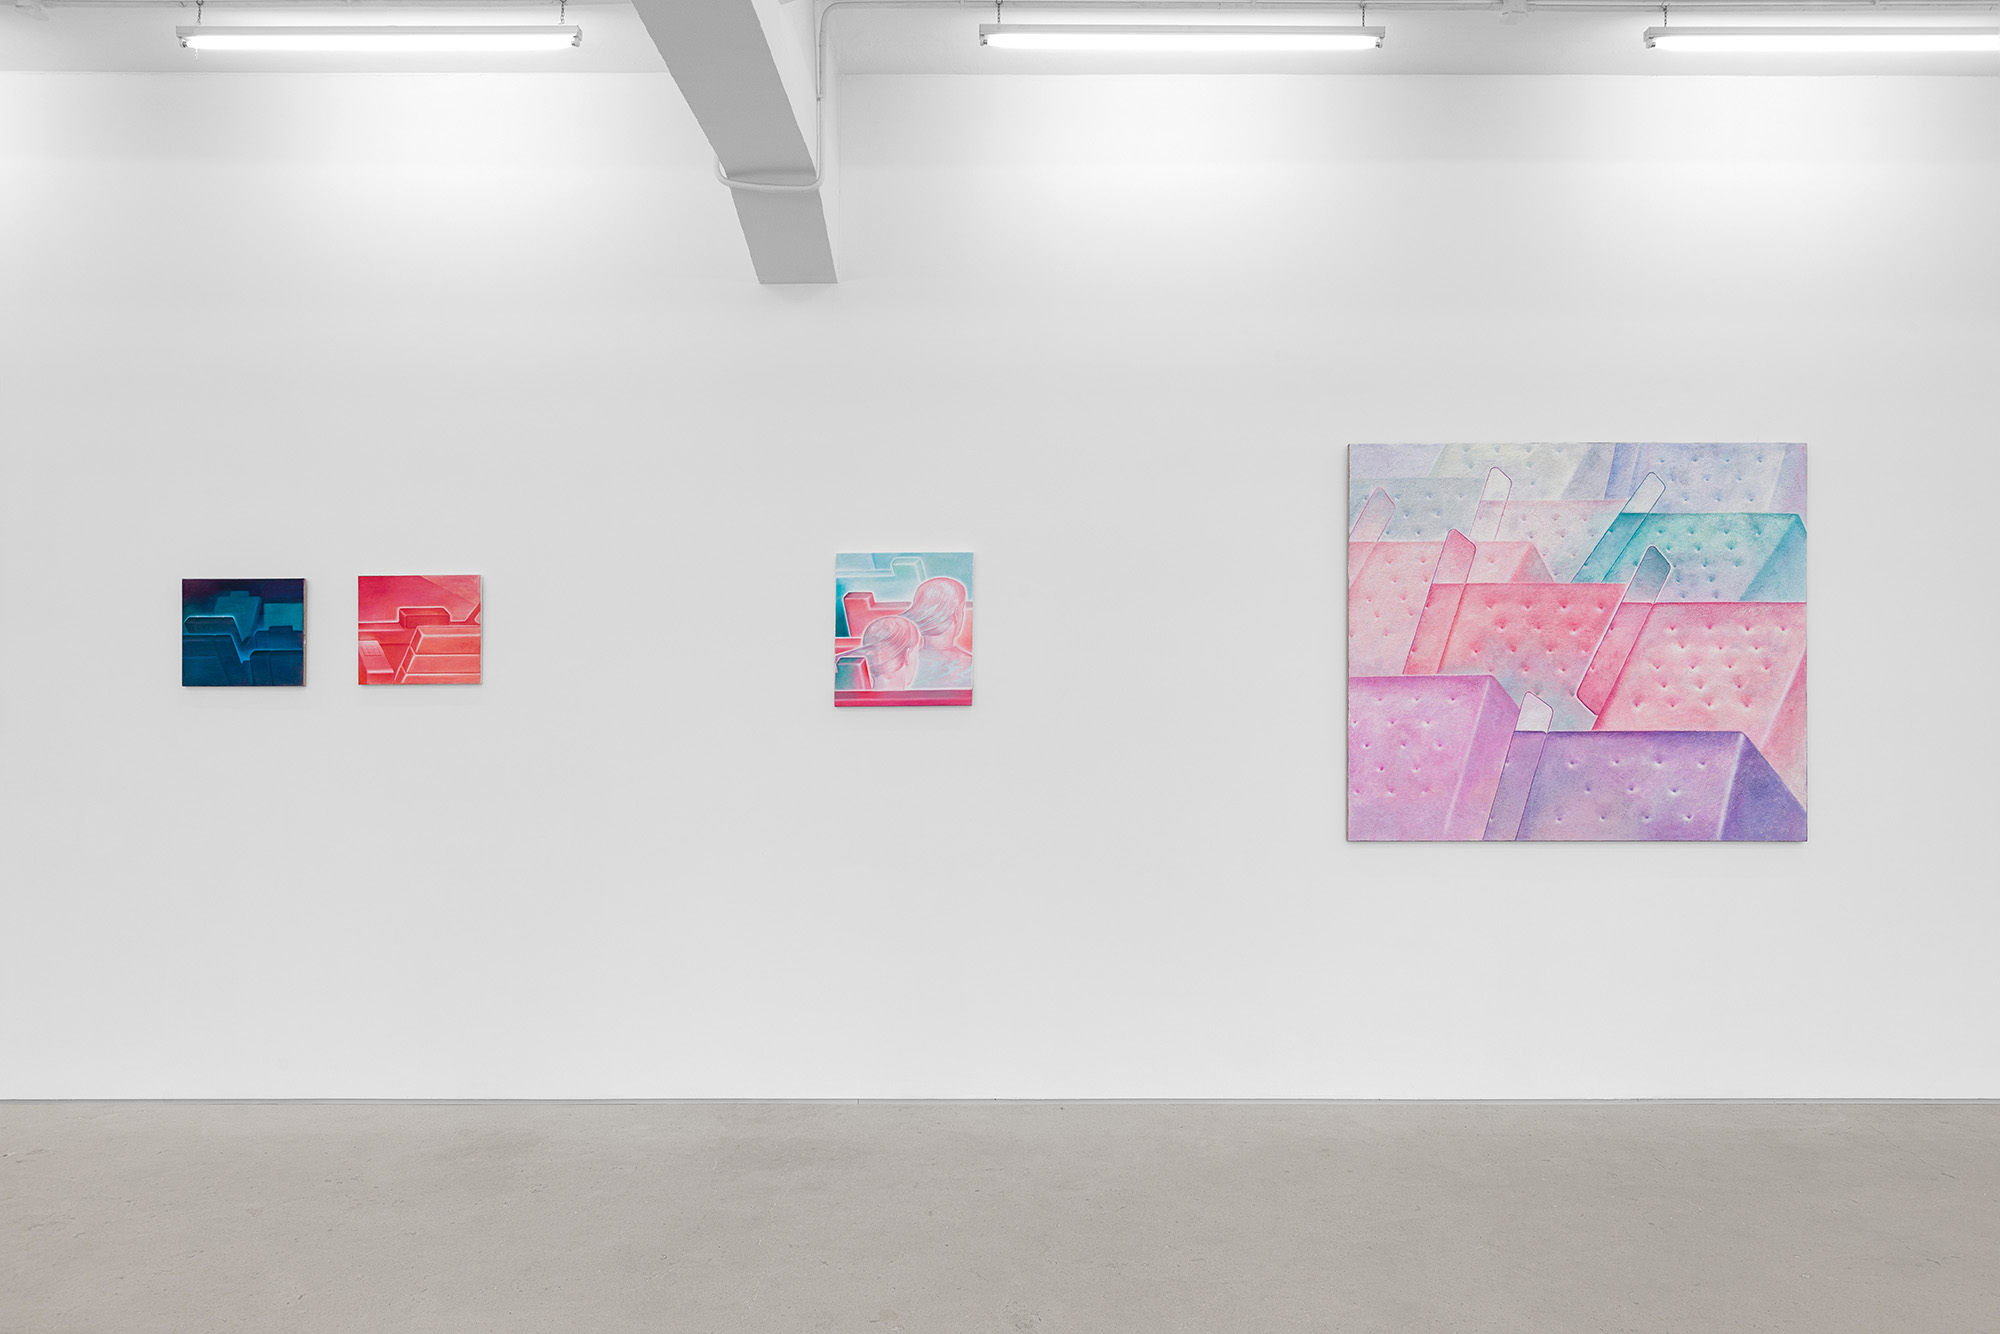 Installation view of group exhibition, Vacation II, at Gallery Vacancy, featuring works by Richard Burton.